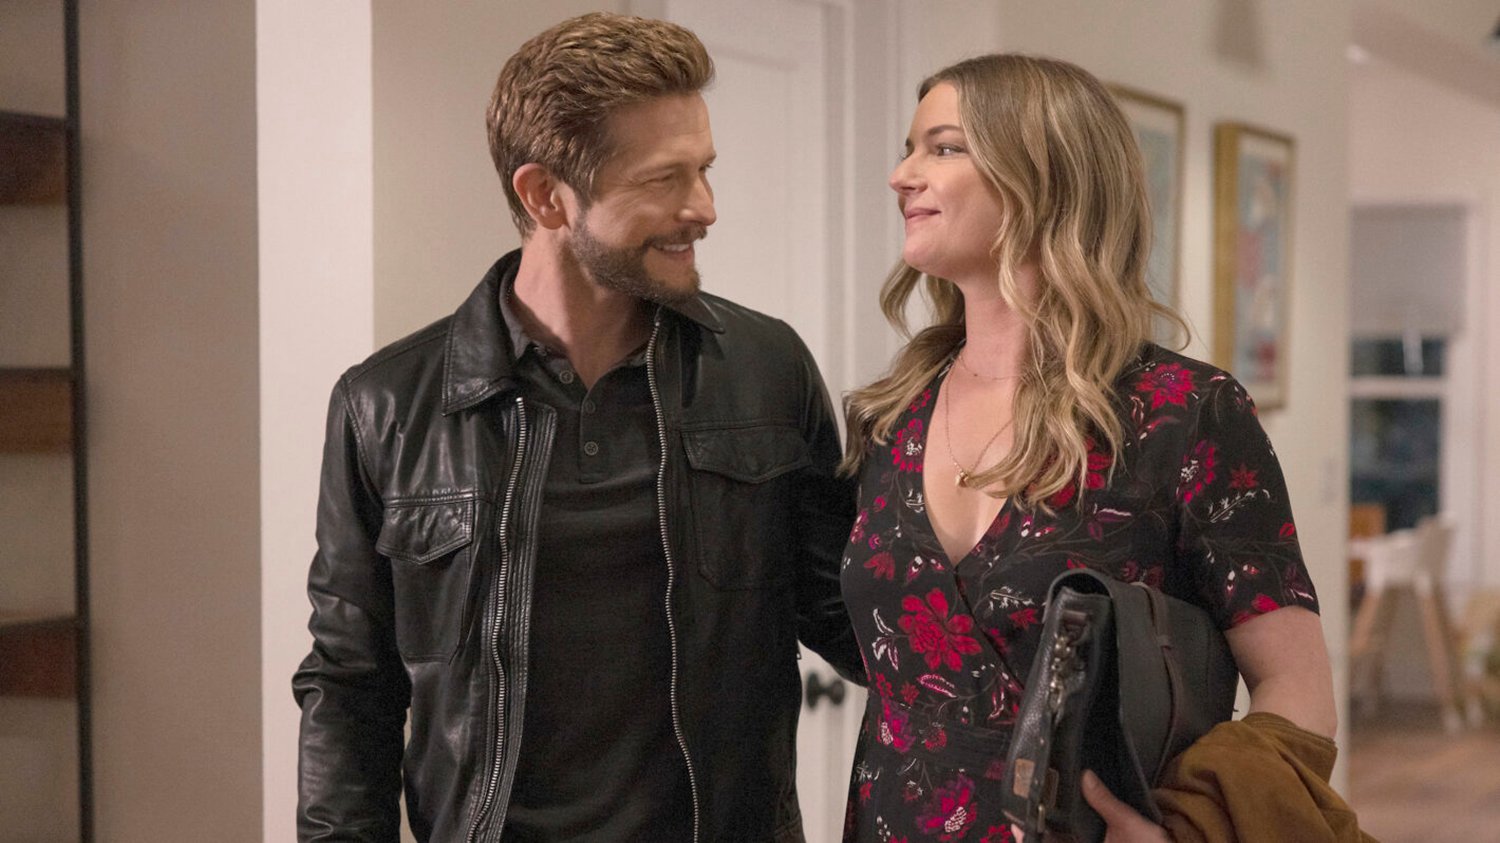 Matt Czuchry as Conrad Hawkins and Emily VanCamp as Nic Nevin in The Resident Season 5 finale.